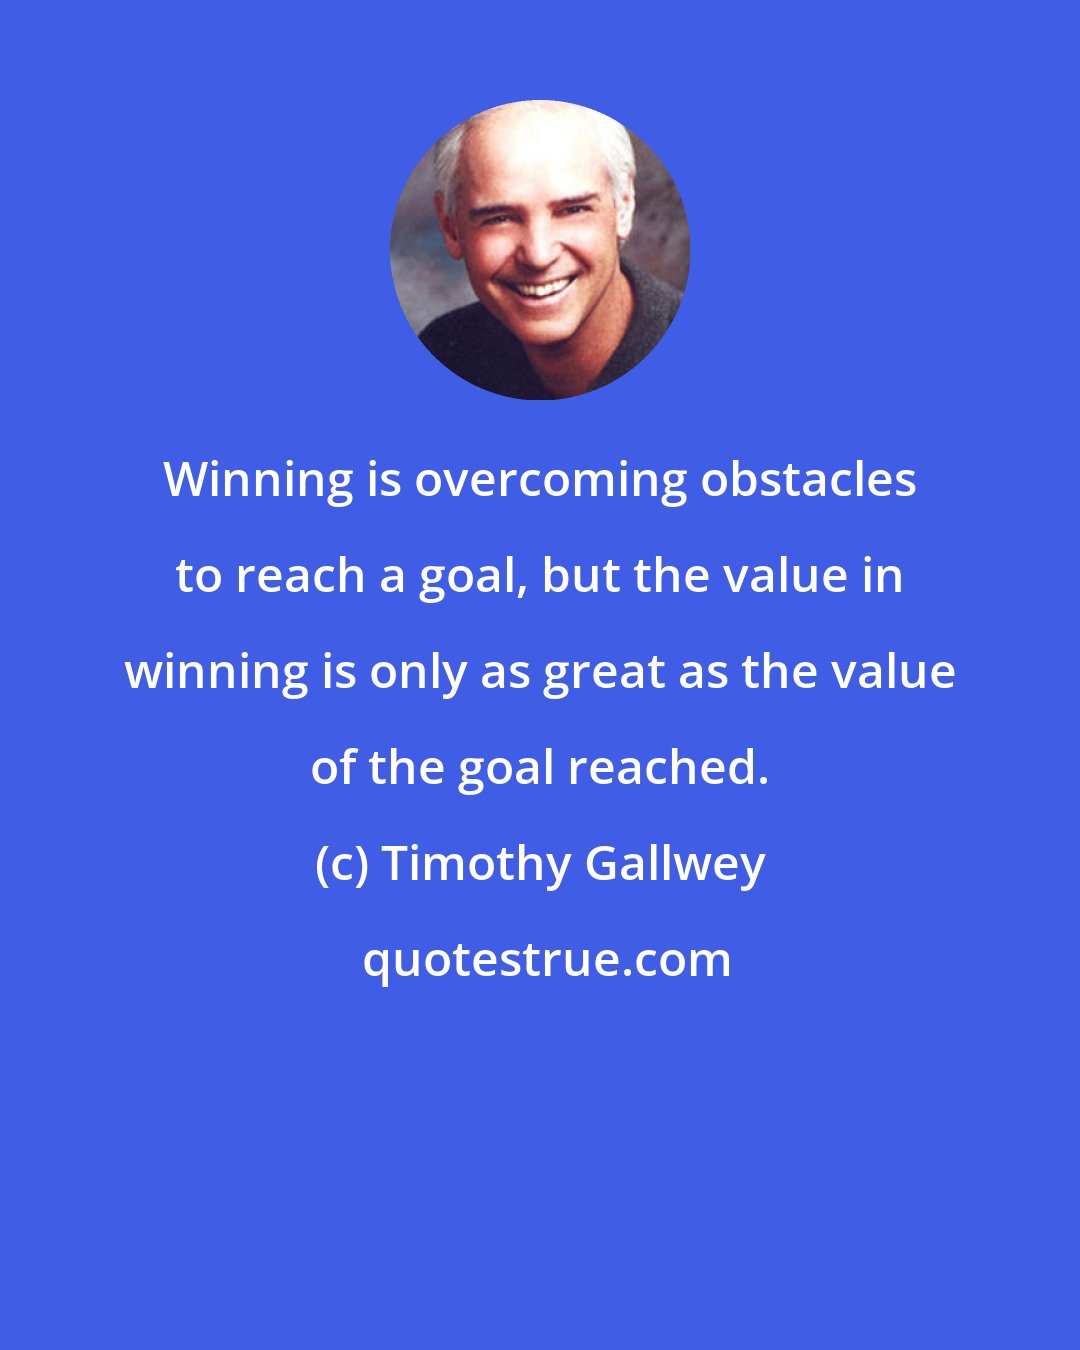 Timothy Gallwey: Winning is overcoming obstacles to reach a goal, but the value in winning is only as great as the value of the goal reached.